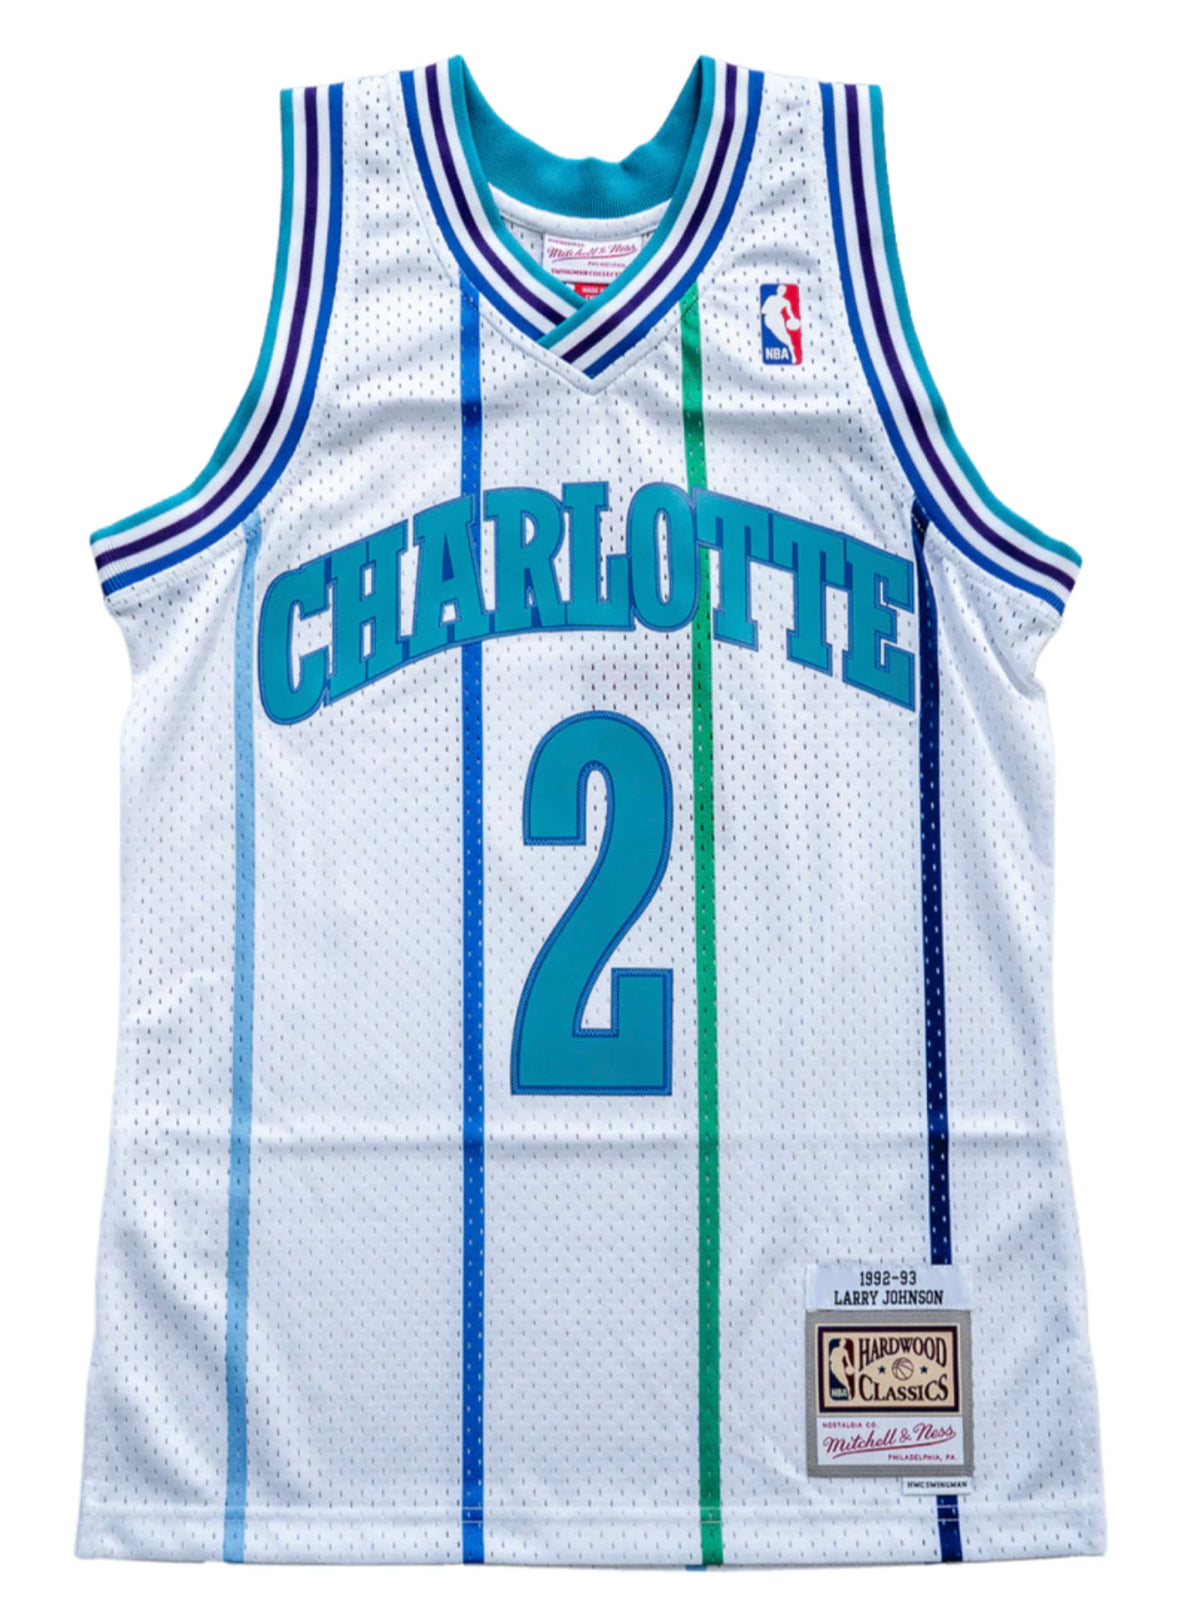 Hornets Classic White Jersey 2 - WCCB Charlotte's CW